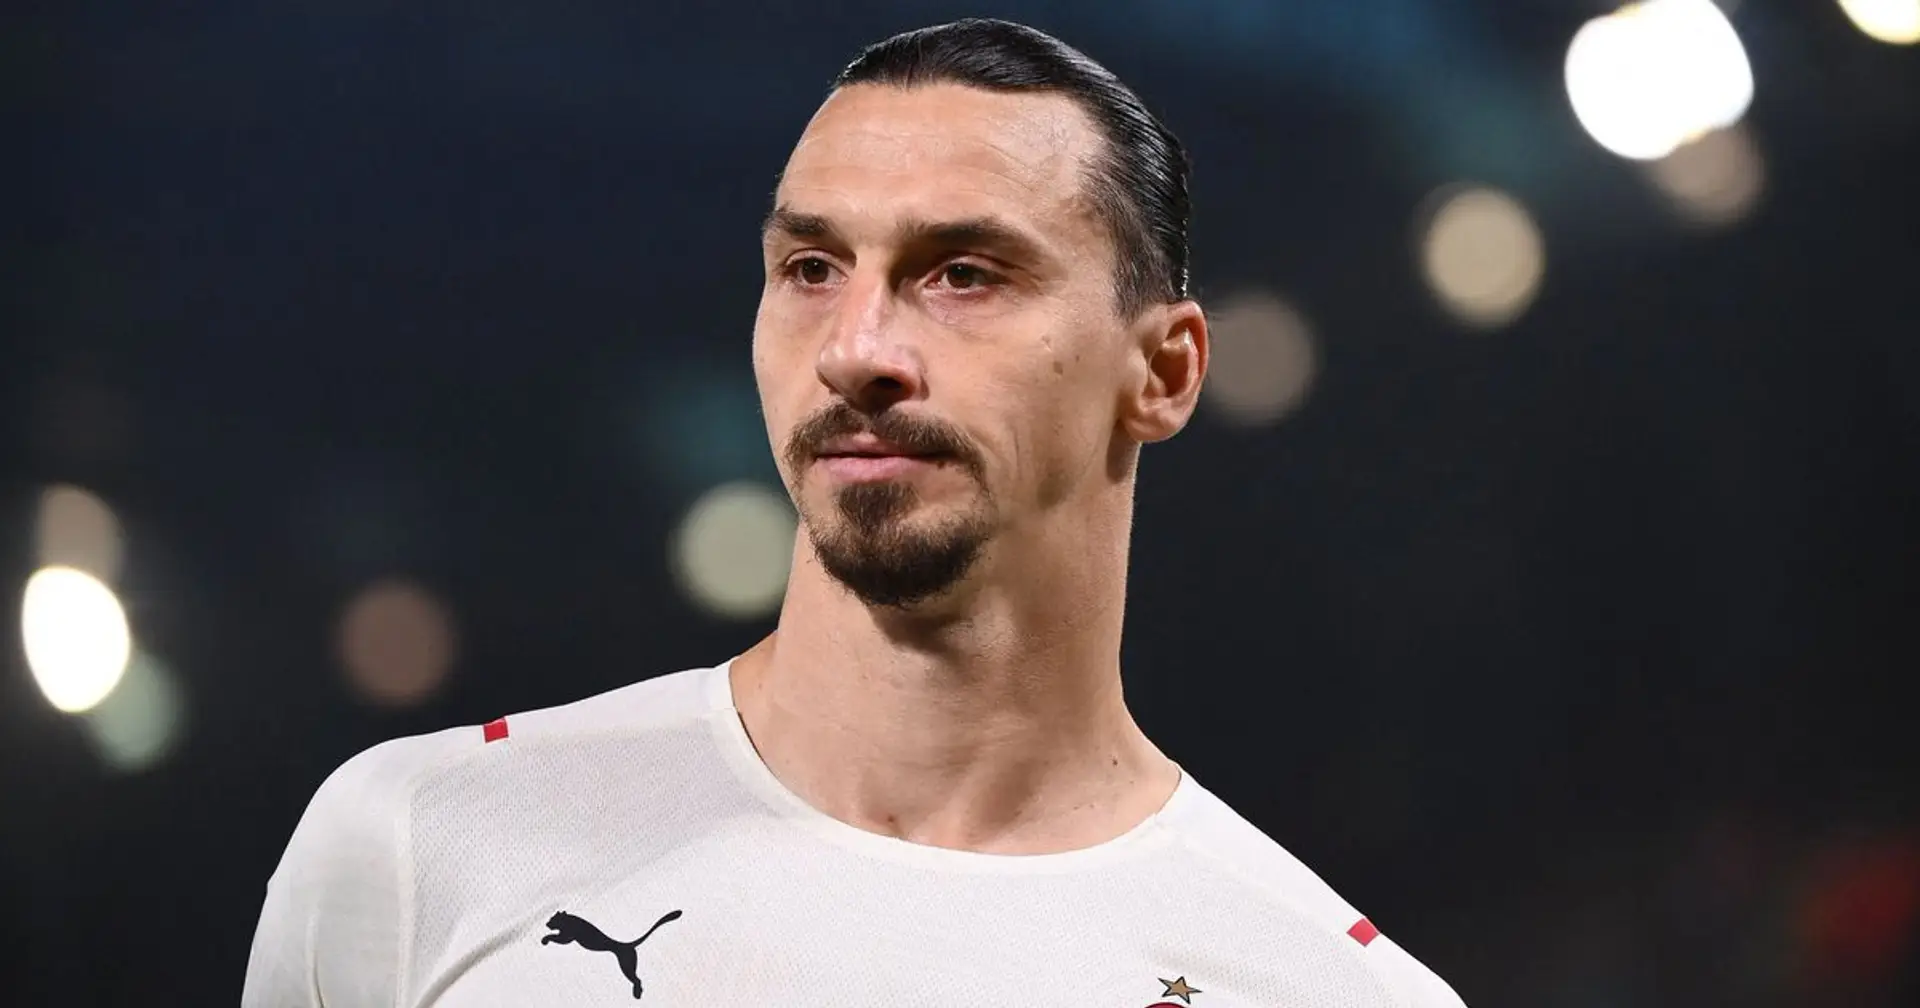 Zlatan Ibrahimovic records surprising own goal stat at the age of 40